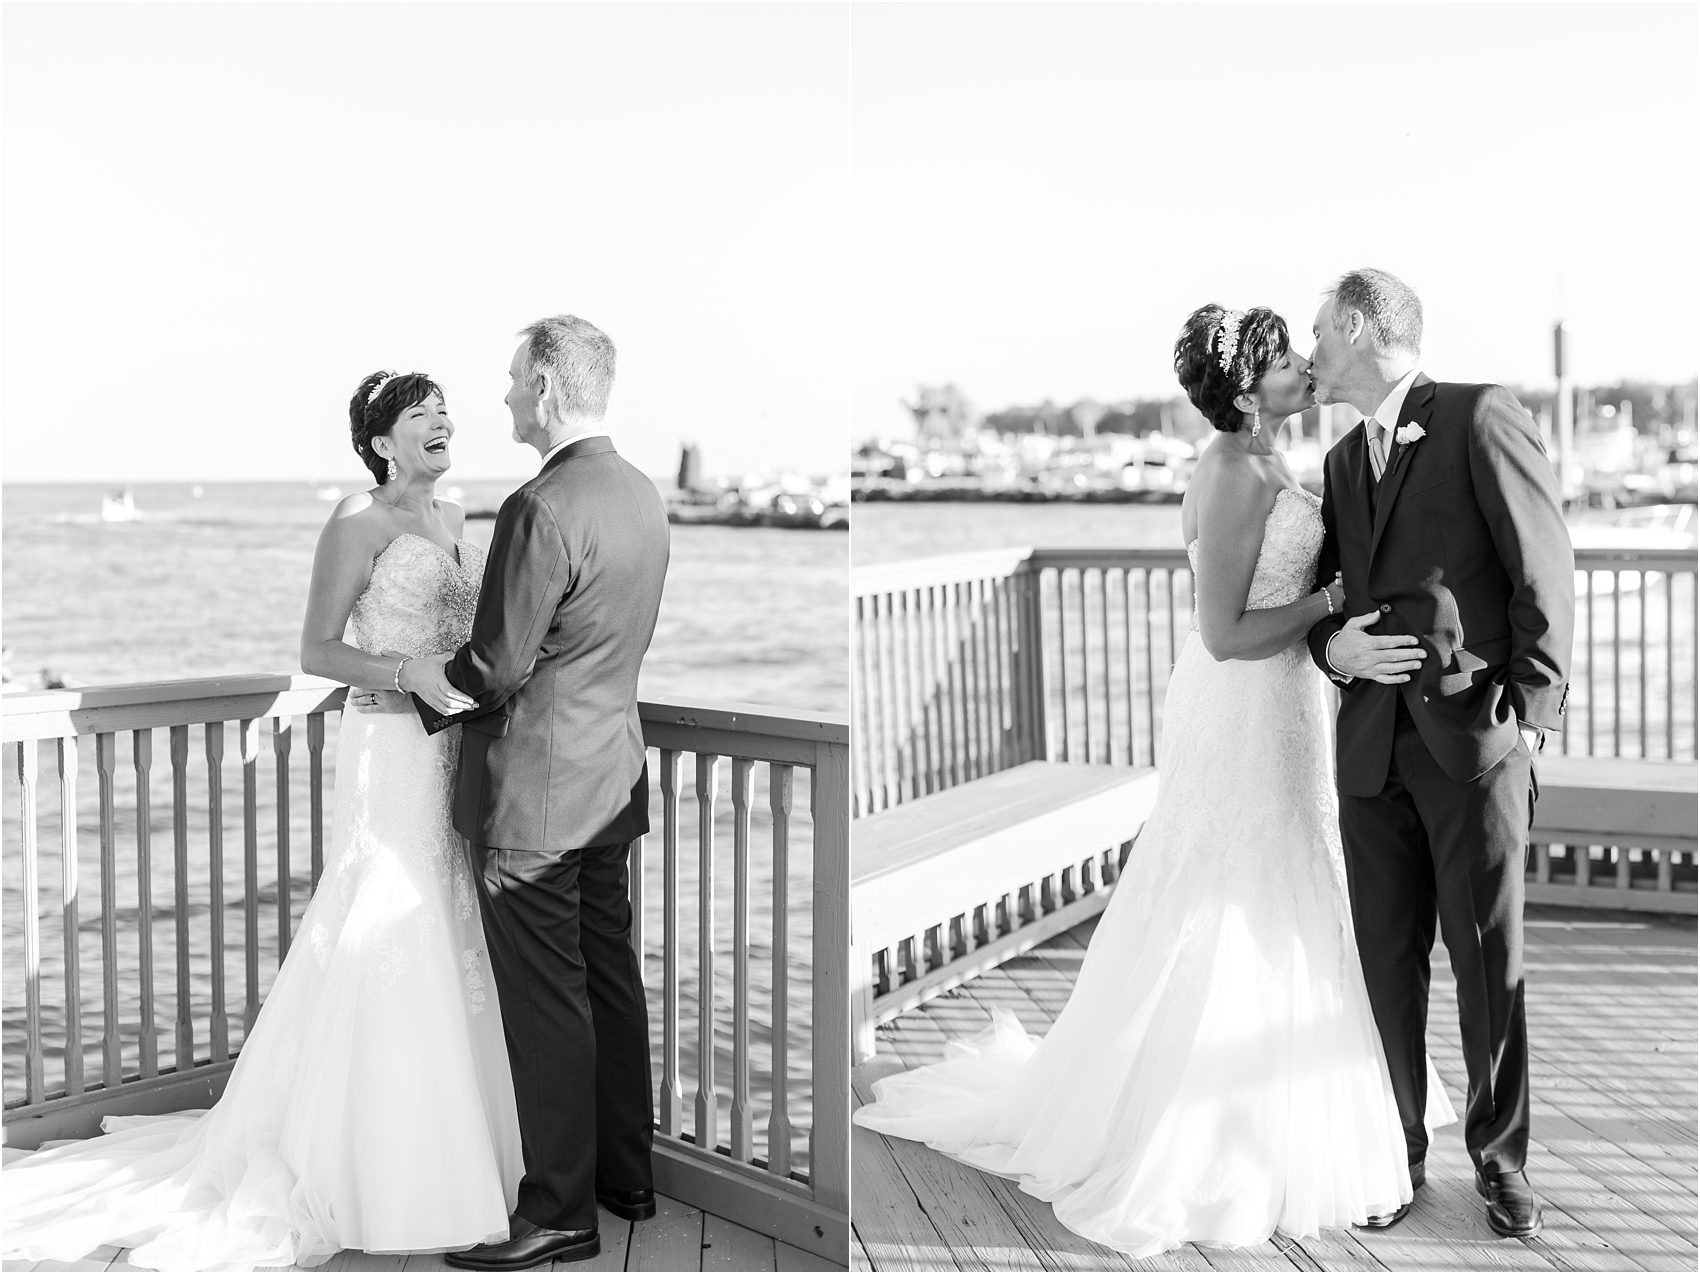 classic-natuical-inspired-wedding-photos-on-infinity-ovation-yacht-in-st-clair-shores-mi-by-courtney-carolyn-photography_0065.jpg